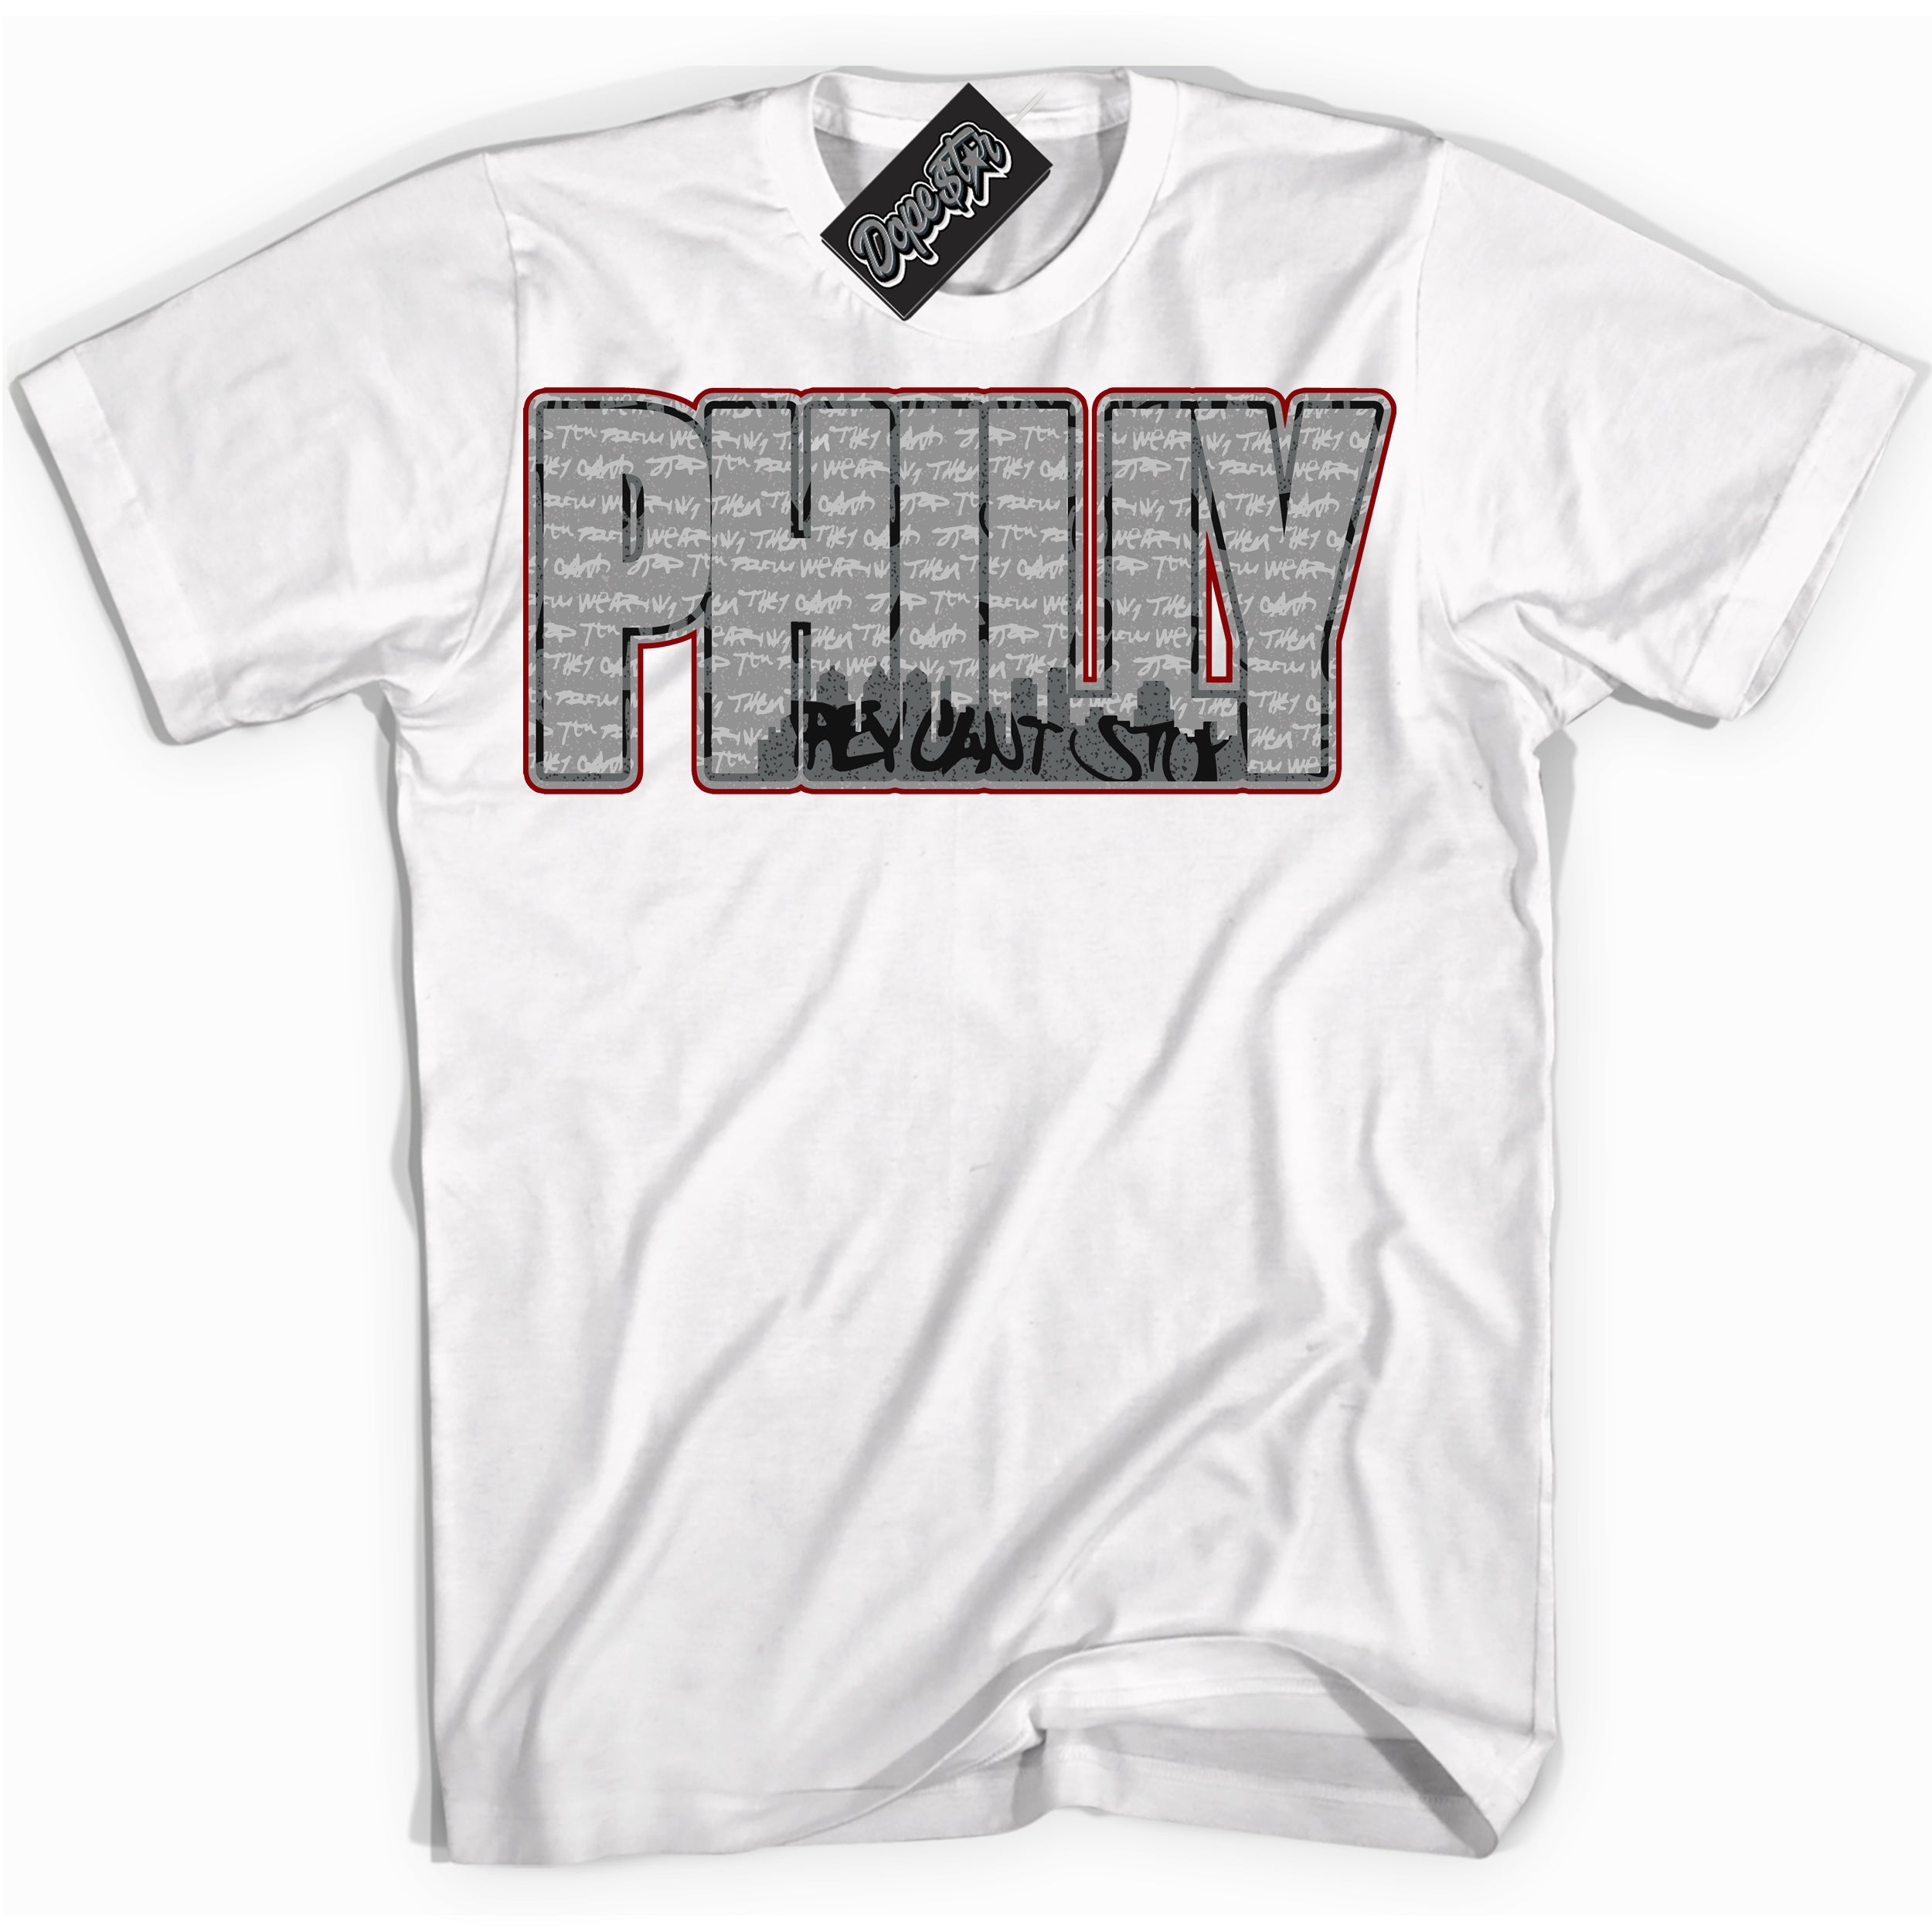 Cool White Shirt with “ Philly ” design that perfectly matches Rebellionaire 1s Sneakers.